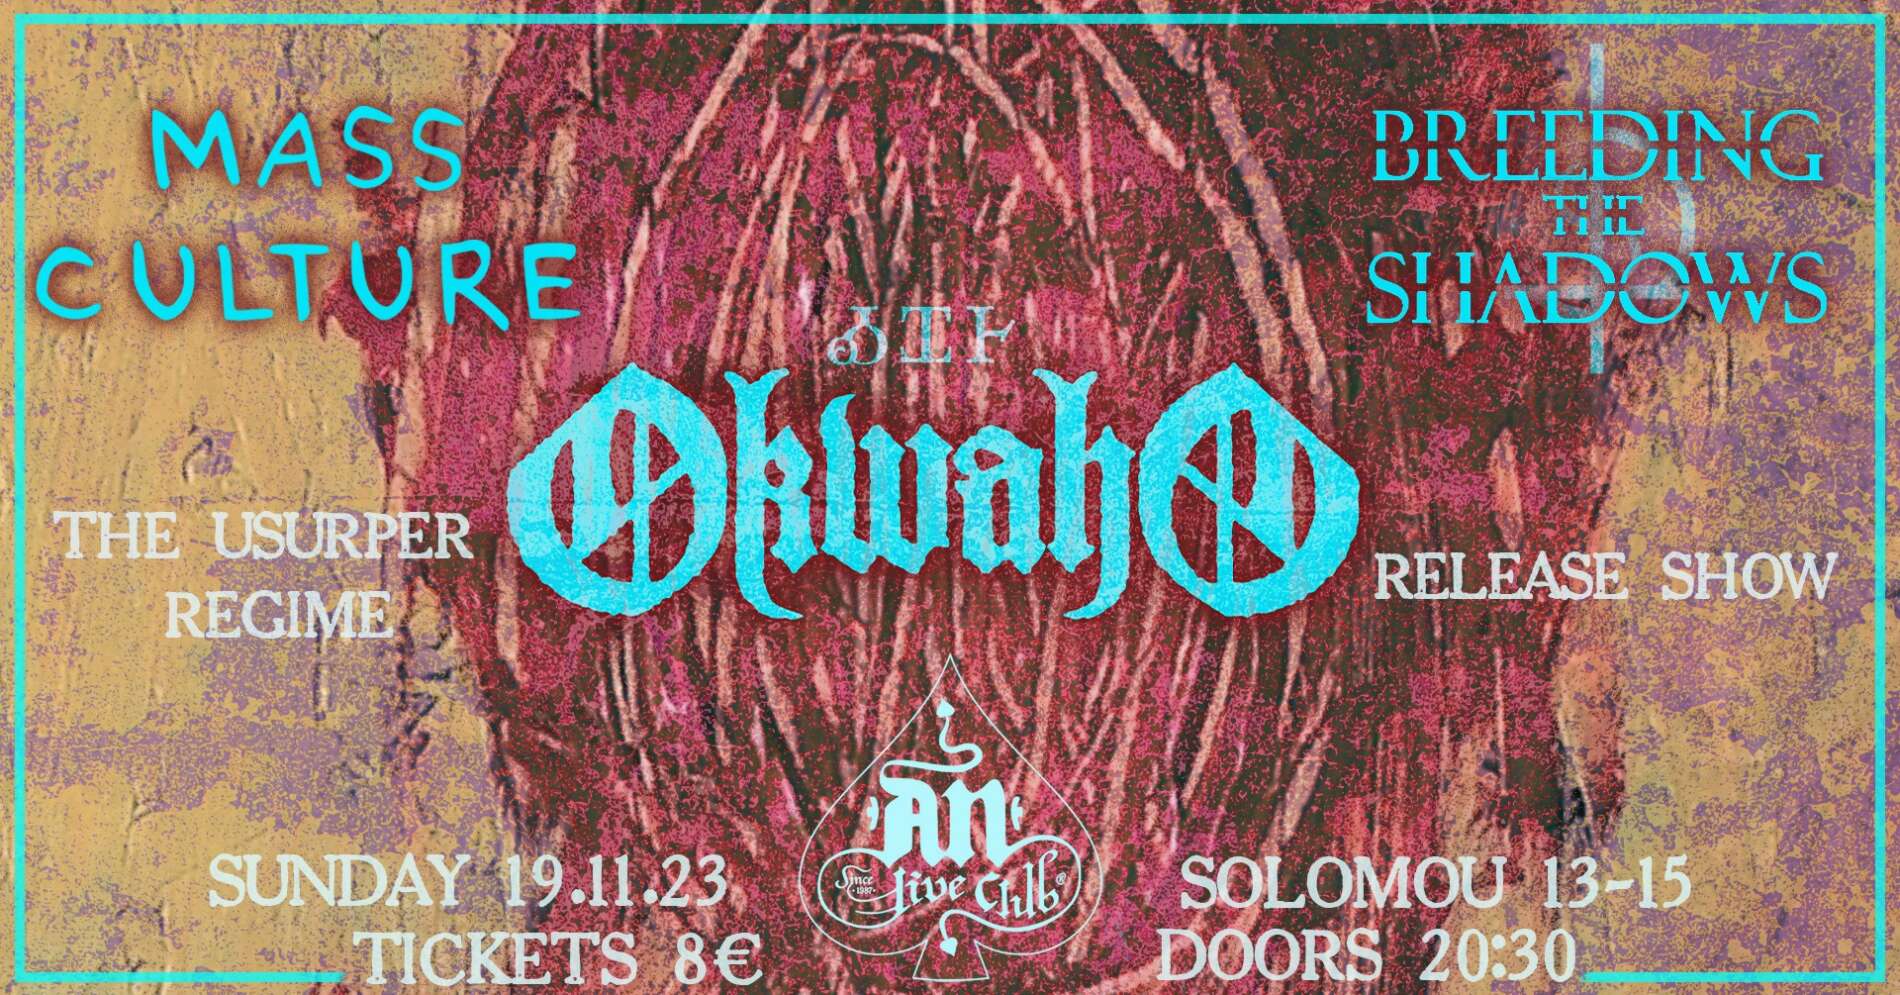 OKWAHO  ''The Usurper Regime'' - Release Live Show  Special guest: MASS CULTURE/ BREEDING THE SHADOWS